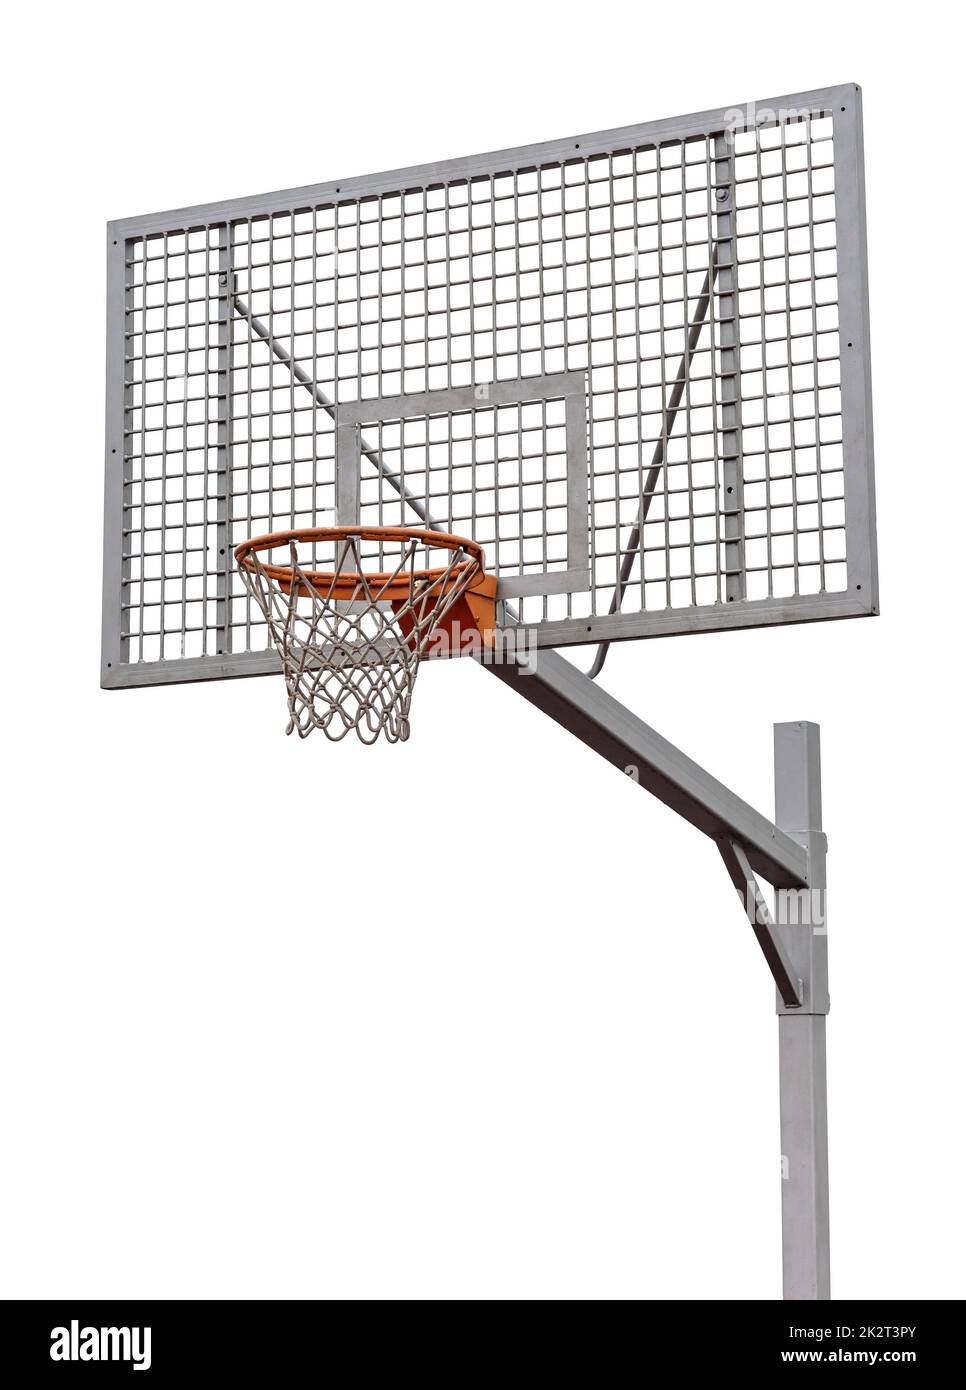 how to build a basketball goal – handmade and beautiful